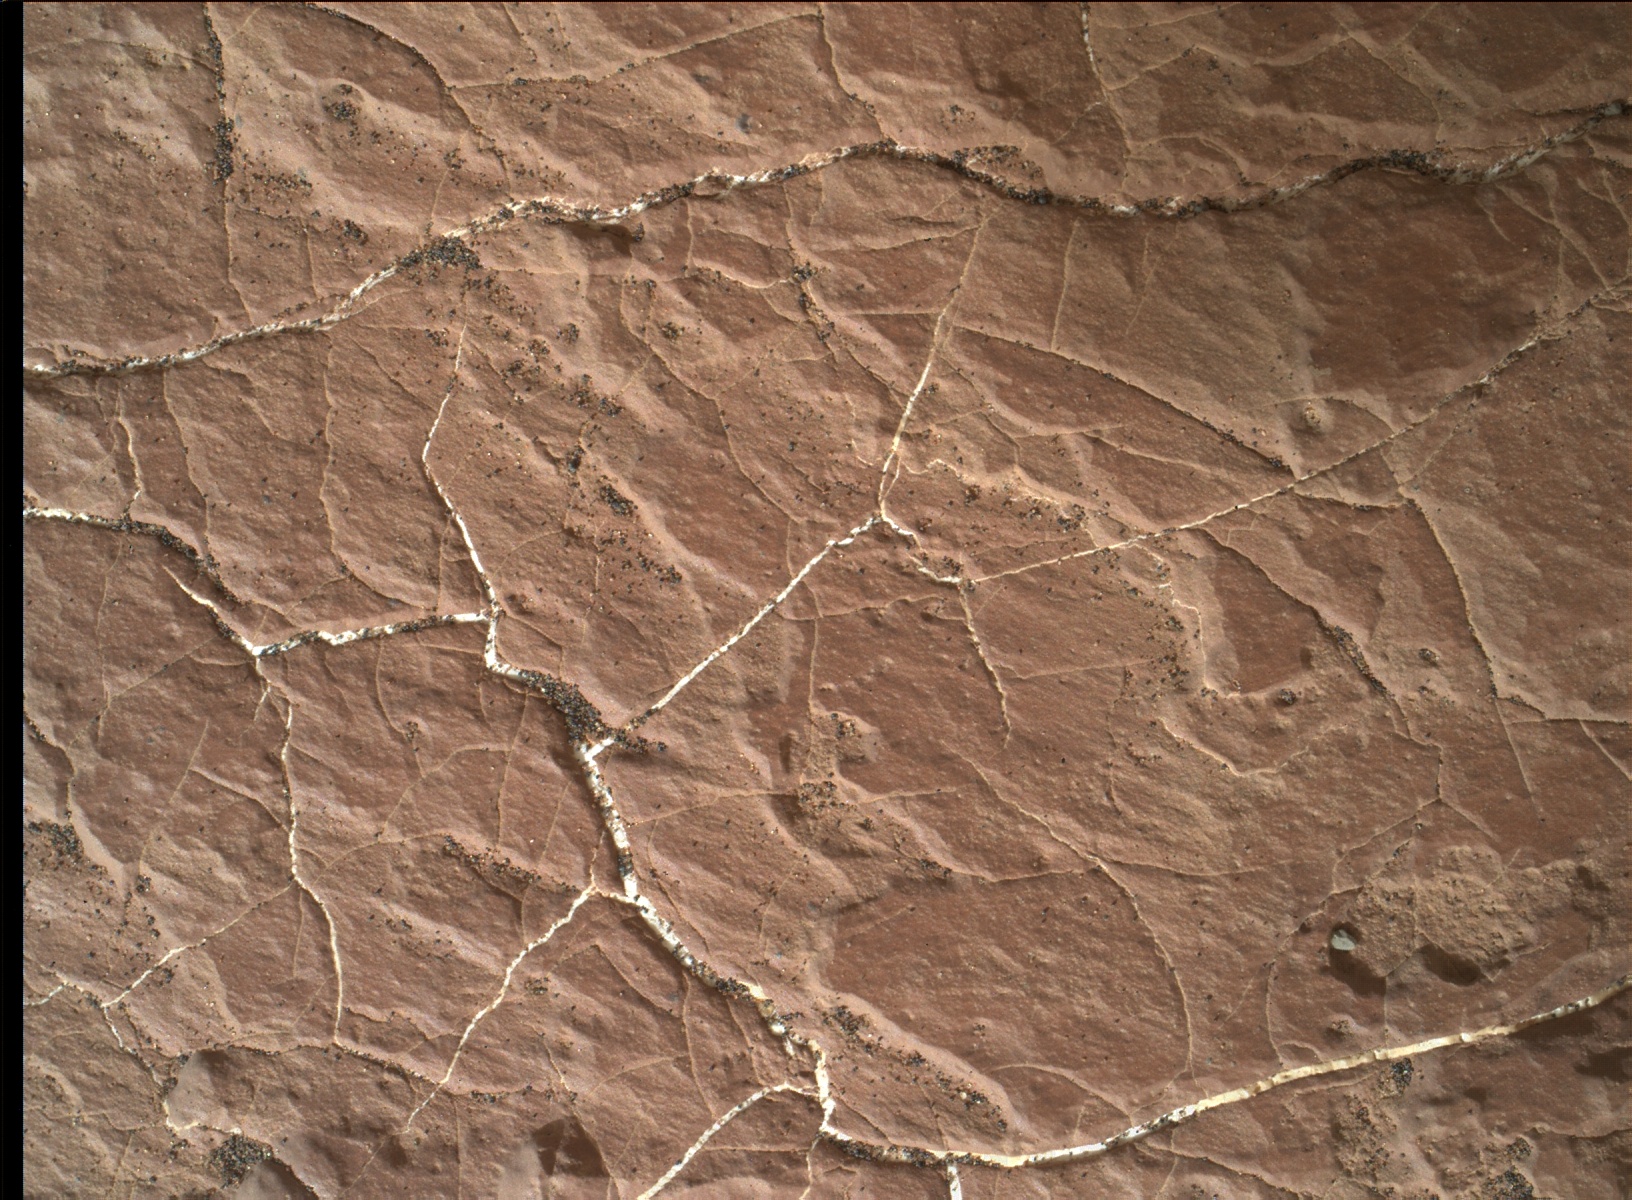 Nasa's Mars rover Curiosity acquired this image using its Mars Hand Lens Imager (MAHLI) on Sol 1593